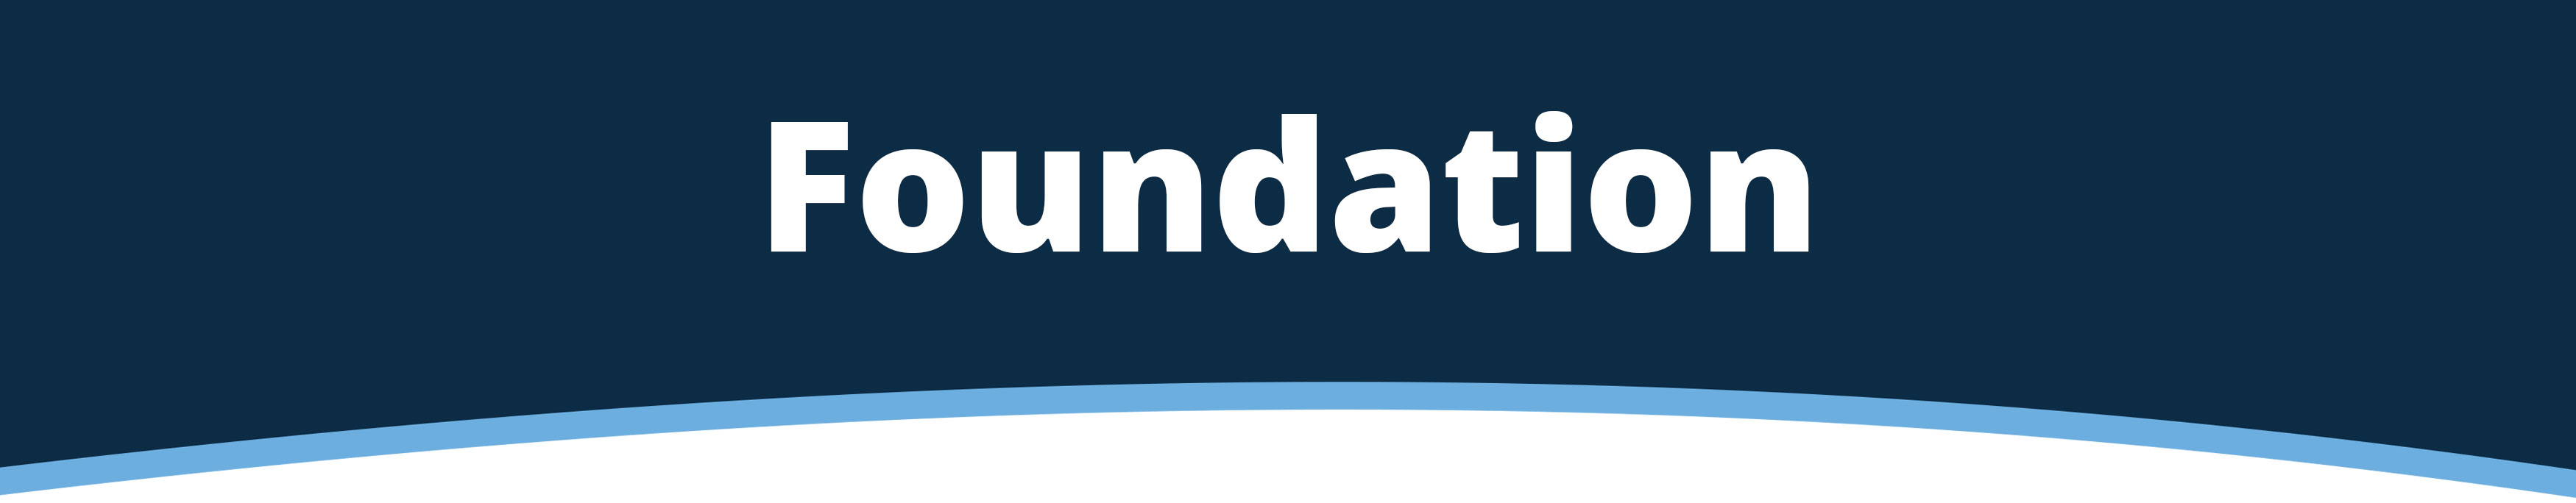 Banner that says: Foundation